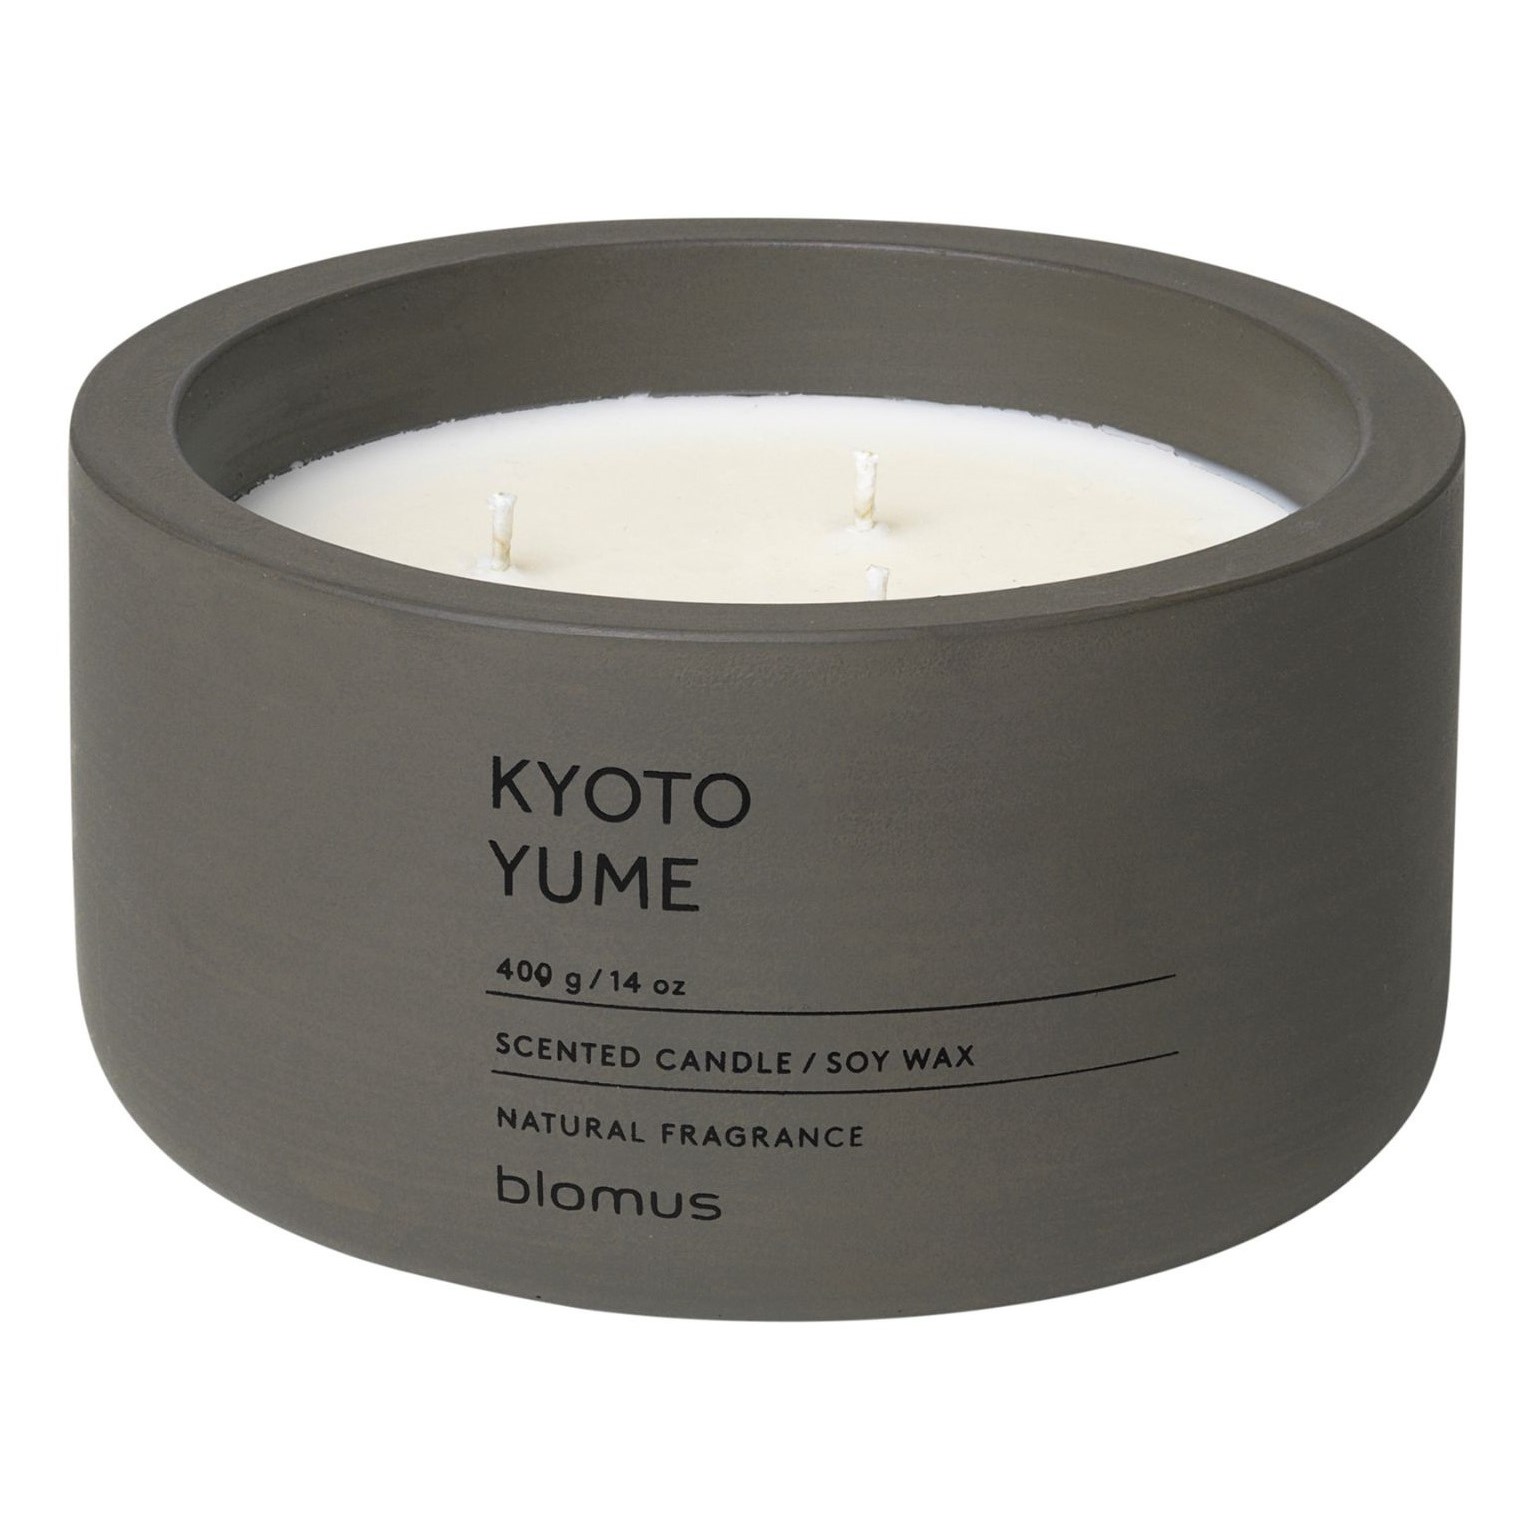 Läs mer om blomus Scented Candle Tarmac Kyoto Yume 400 g